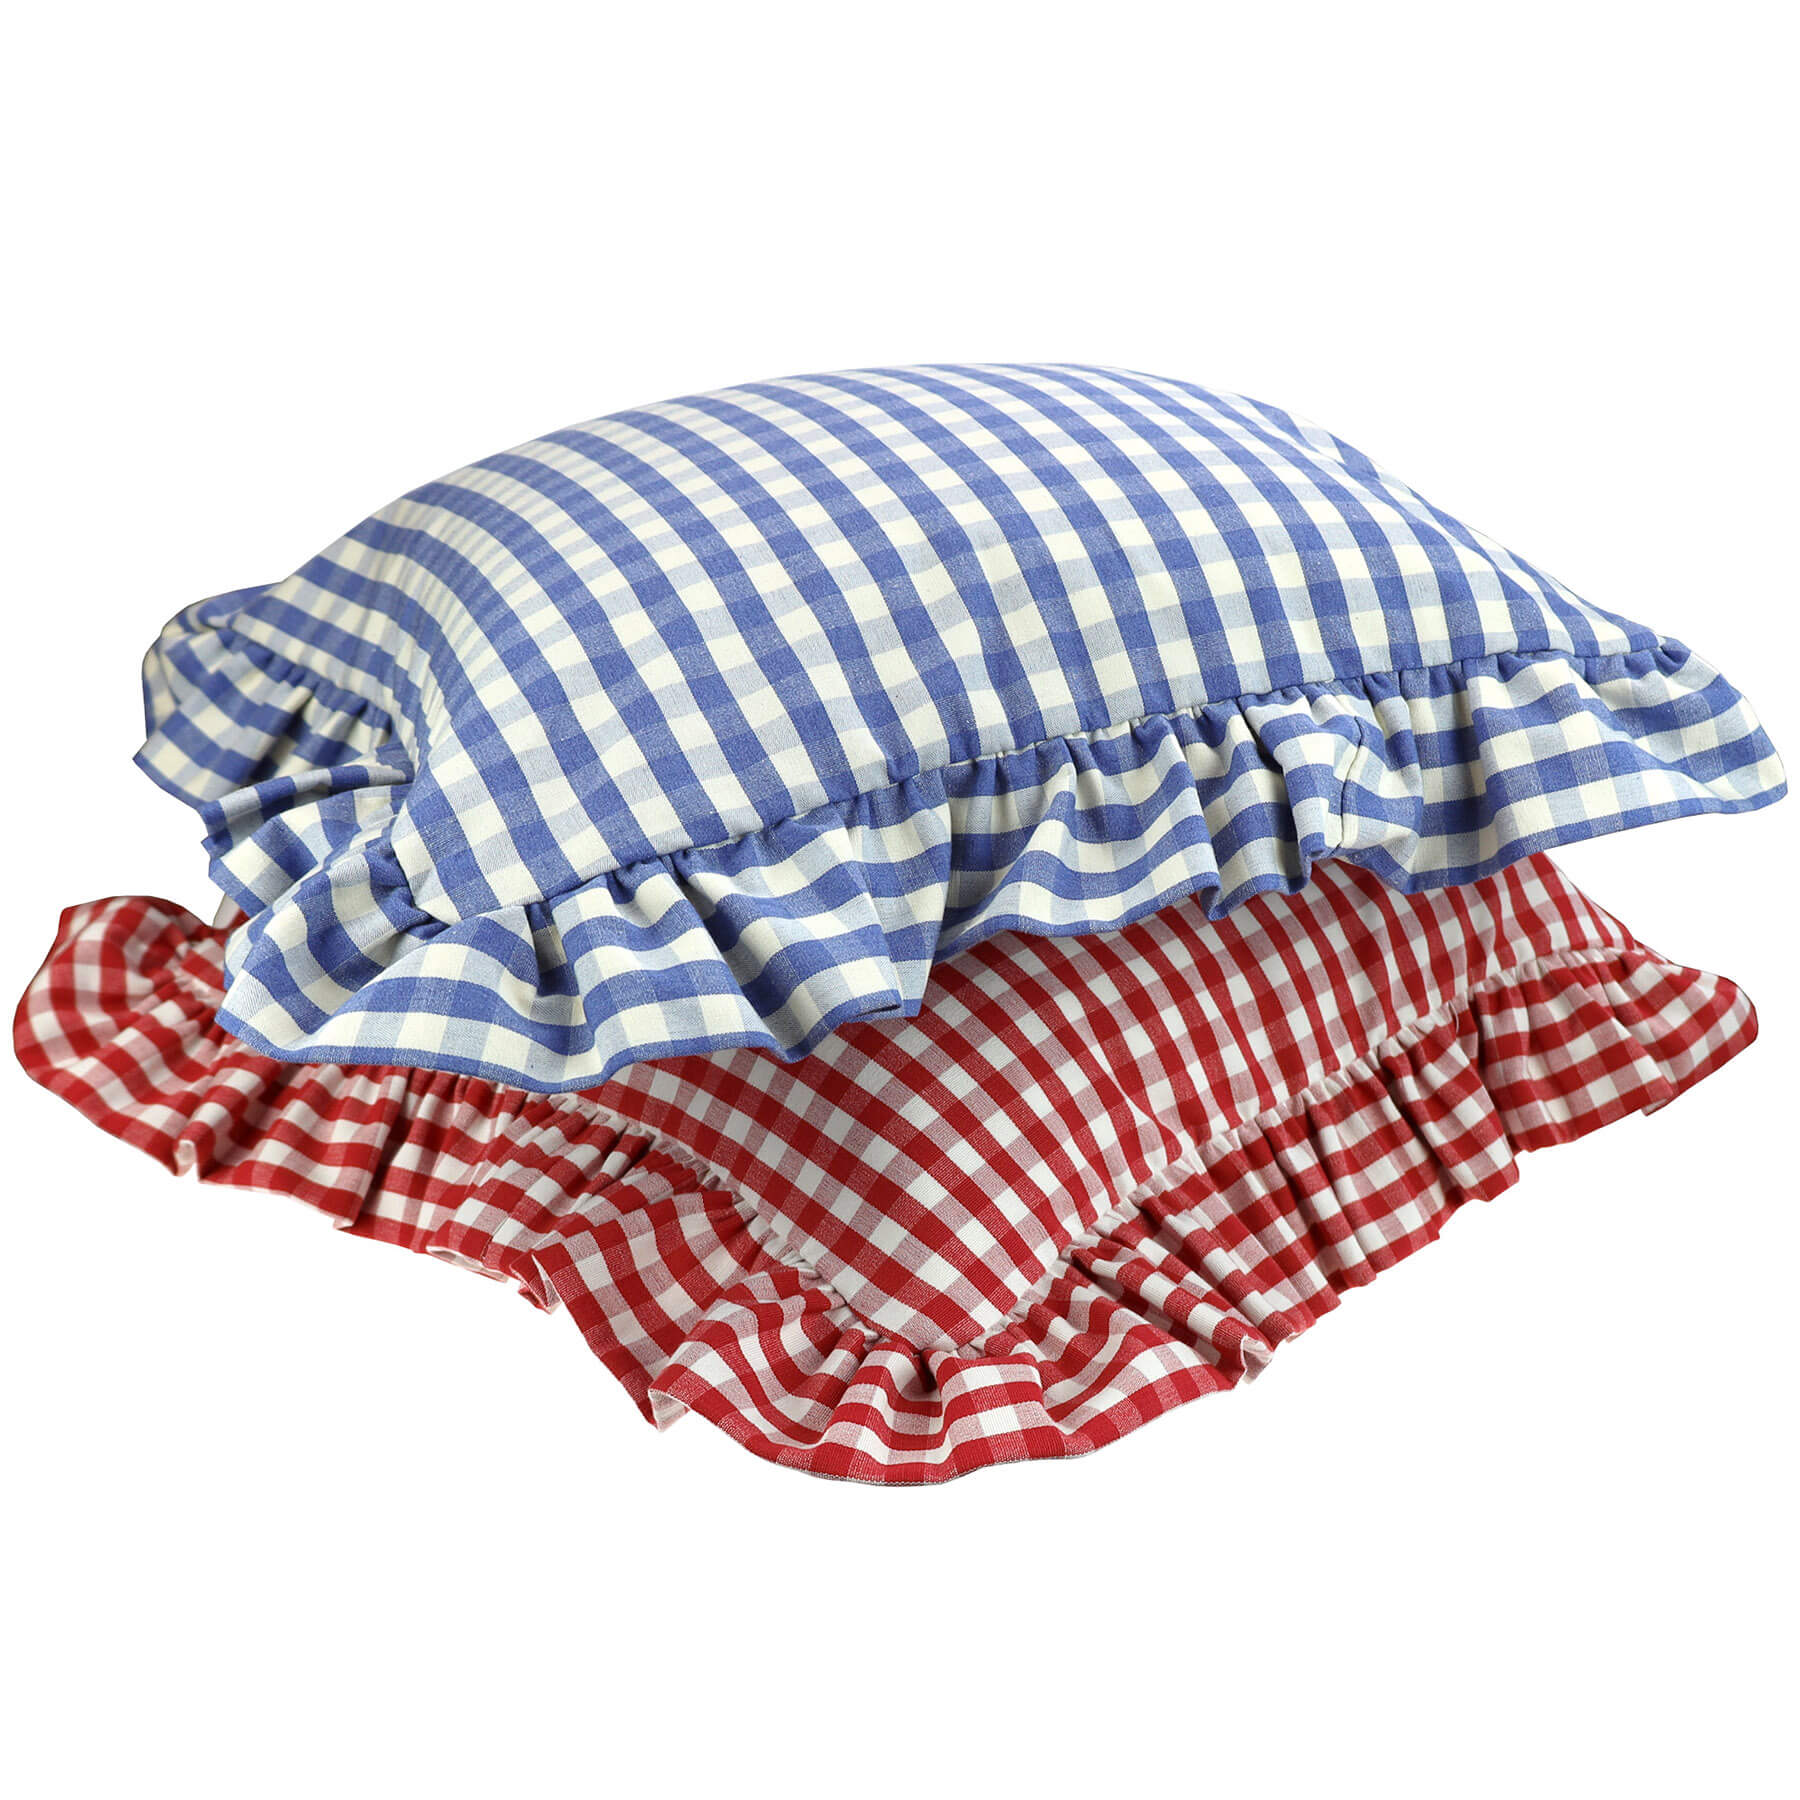 Red Gingham cushion on top of a blue gingham cushion